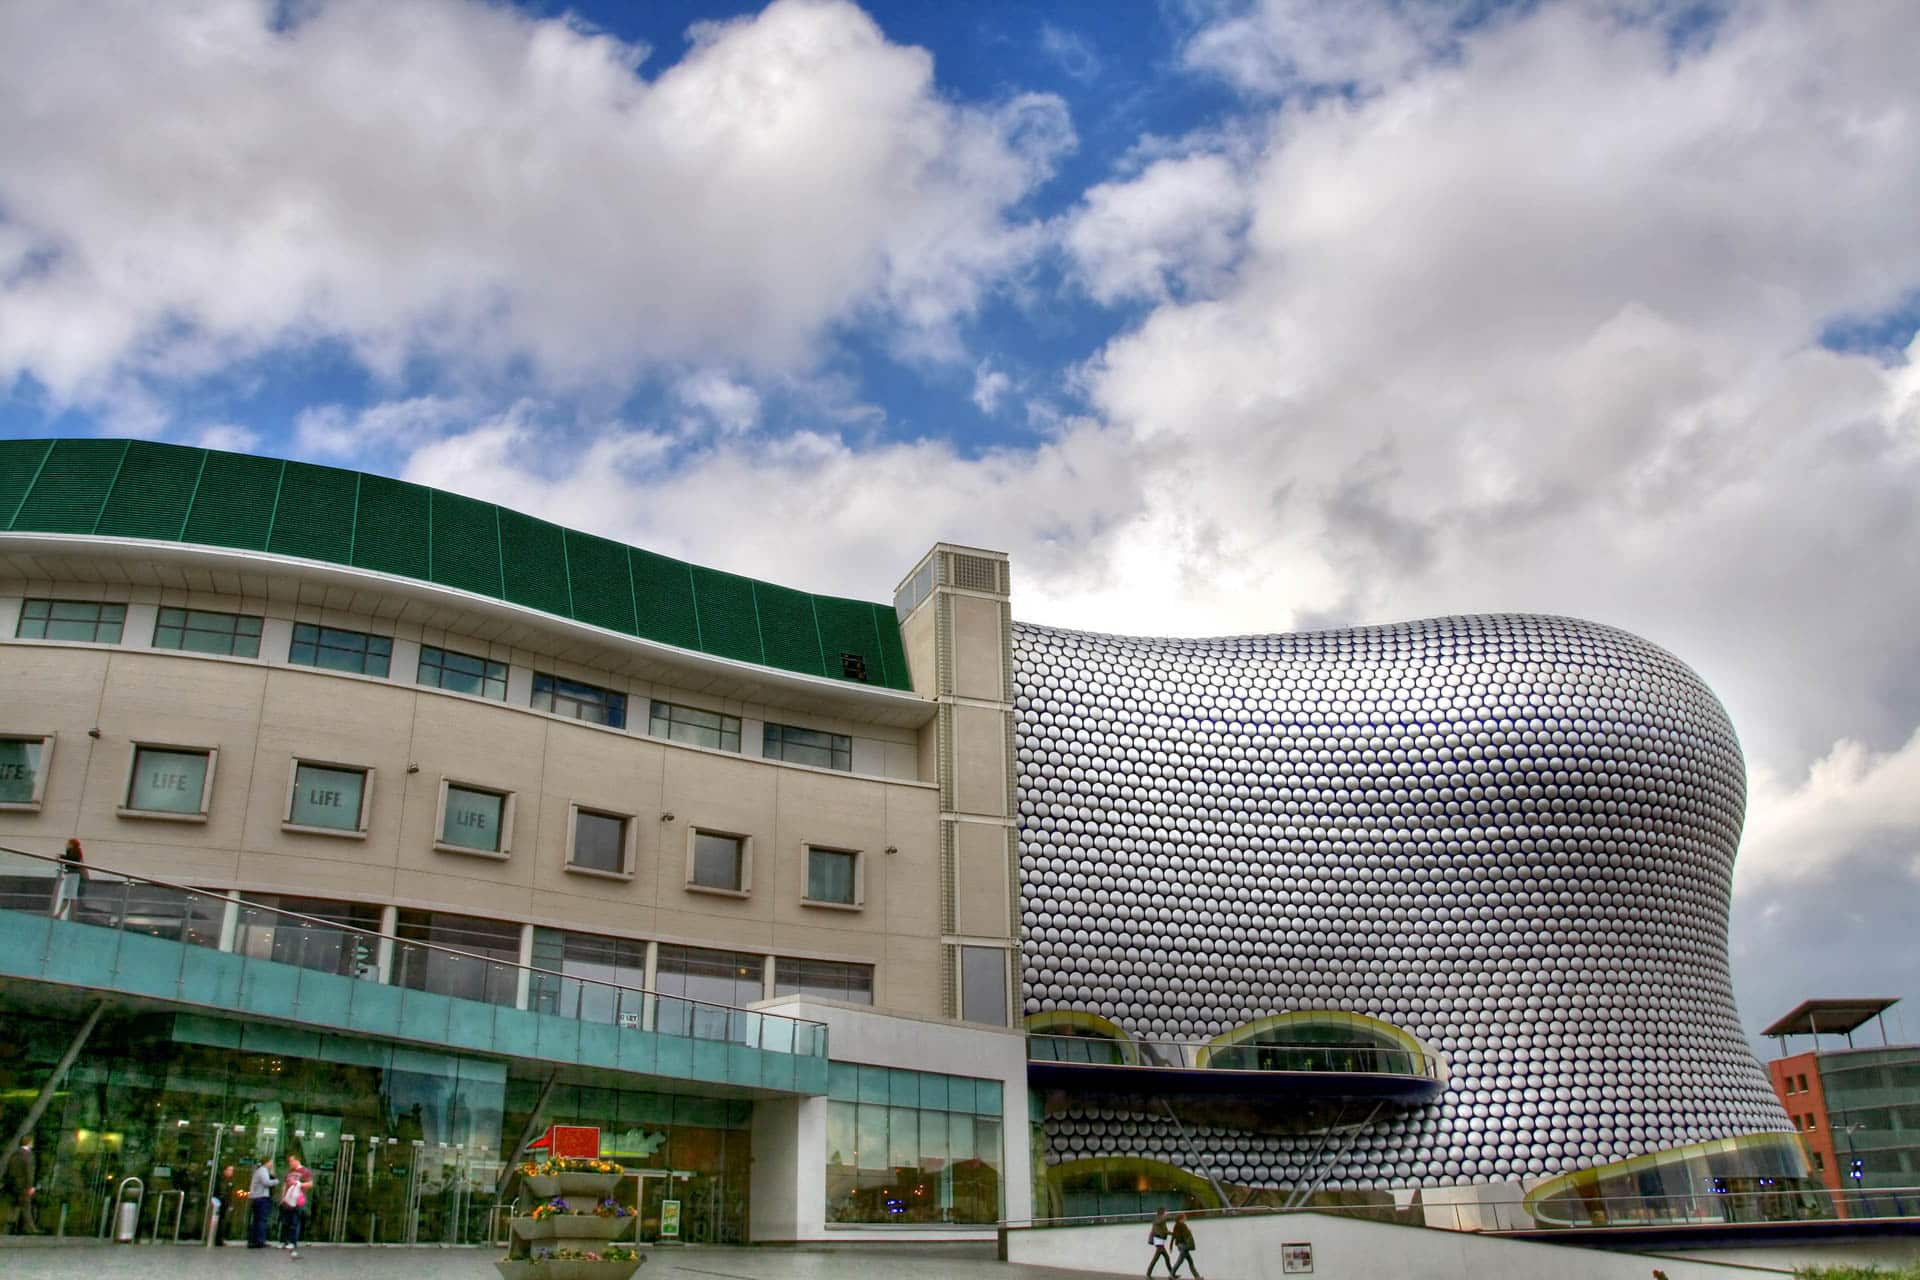 Bullring Grand Central shopping centre and training station in Birmingham